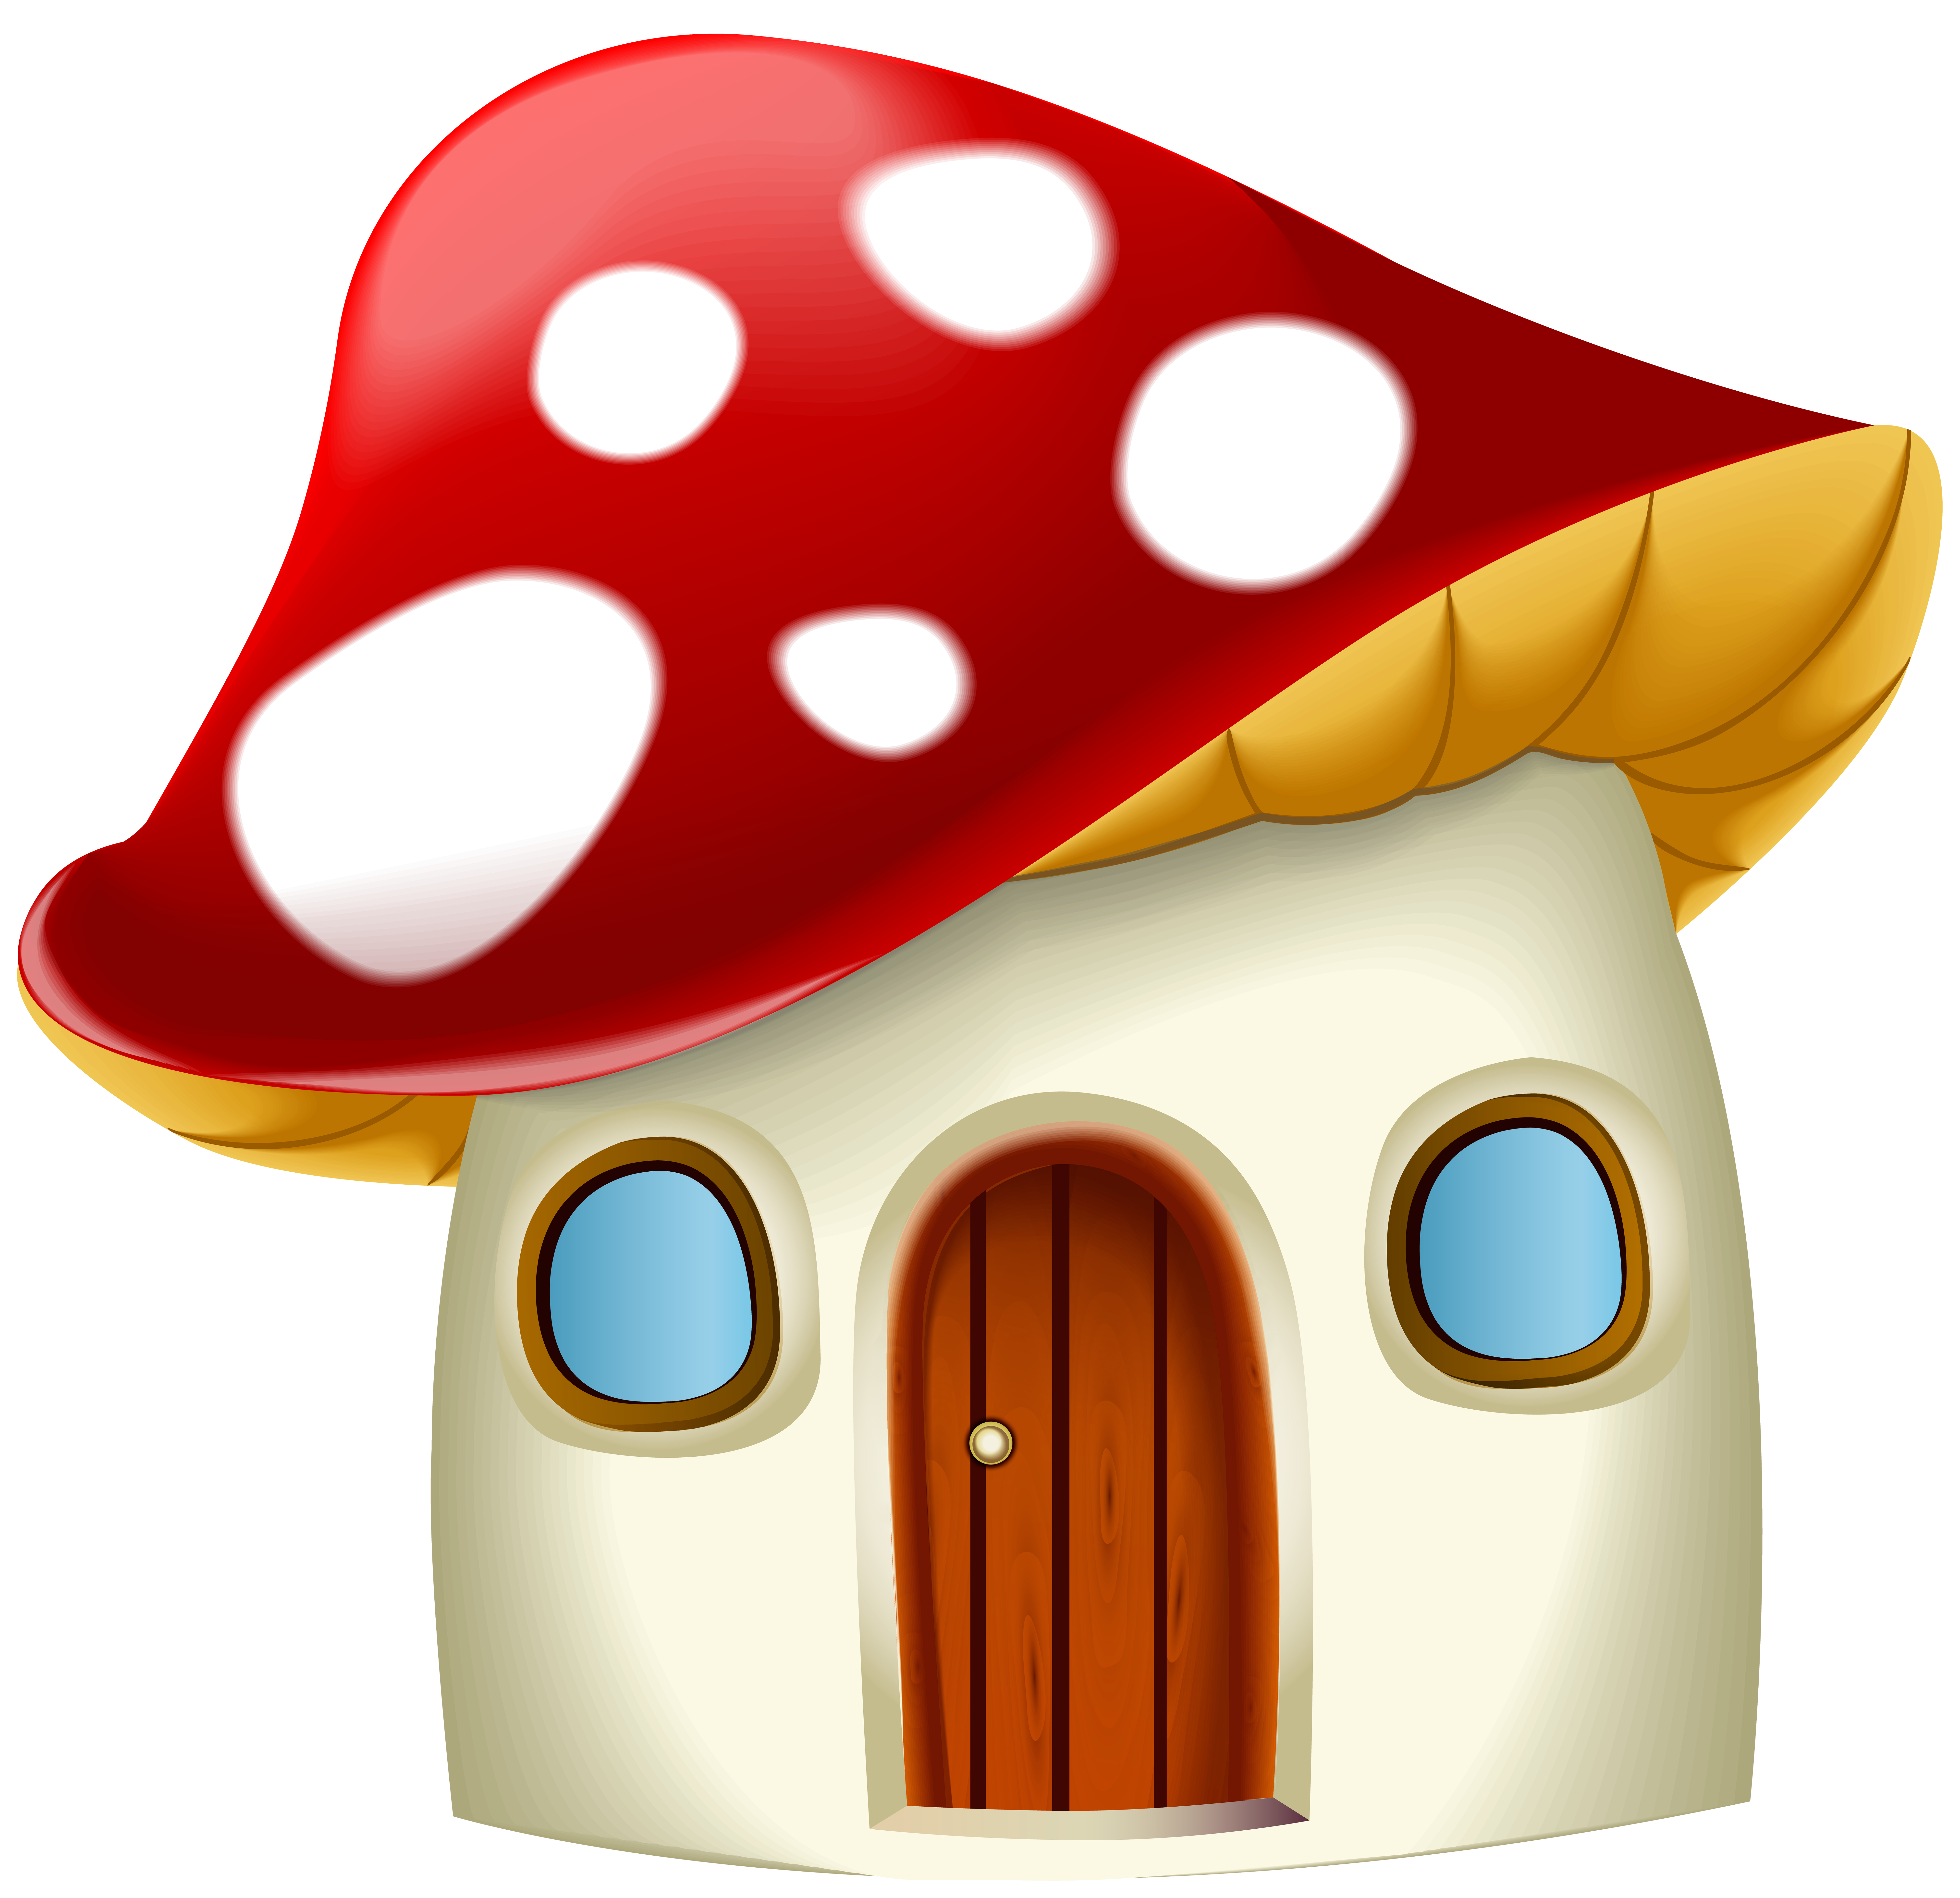 Mushroom House Cartoon​-Quality Free Image and Transparent PNG Clipart